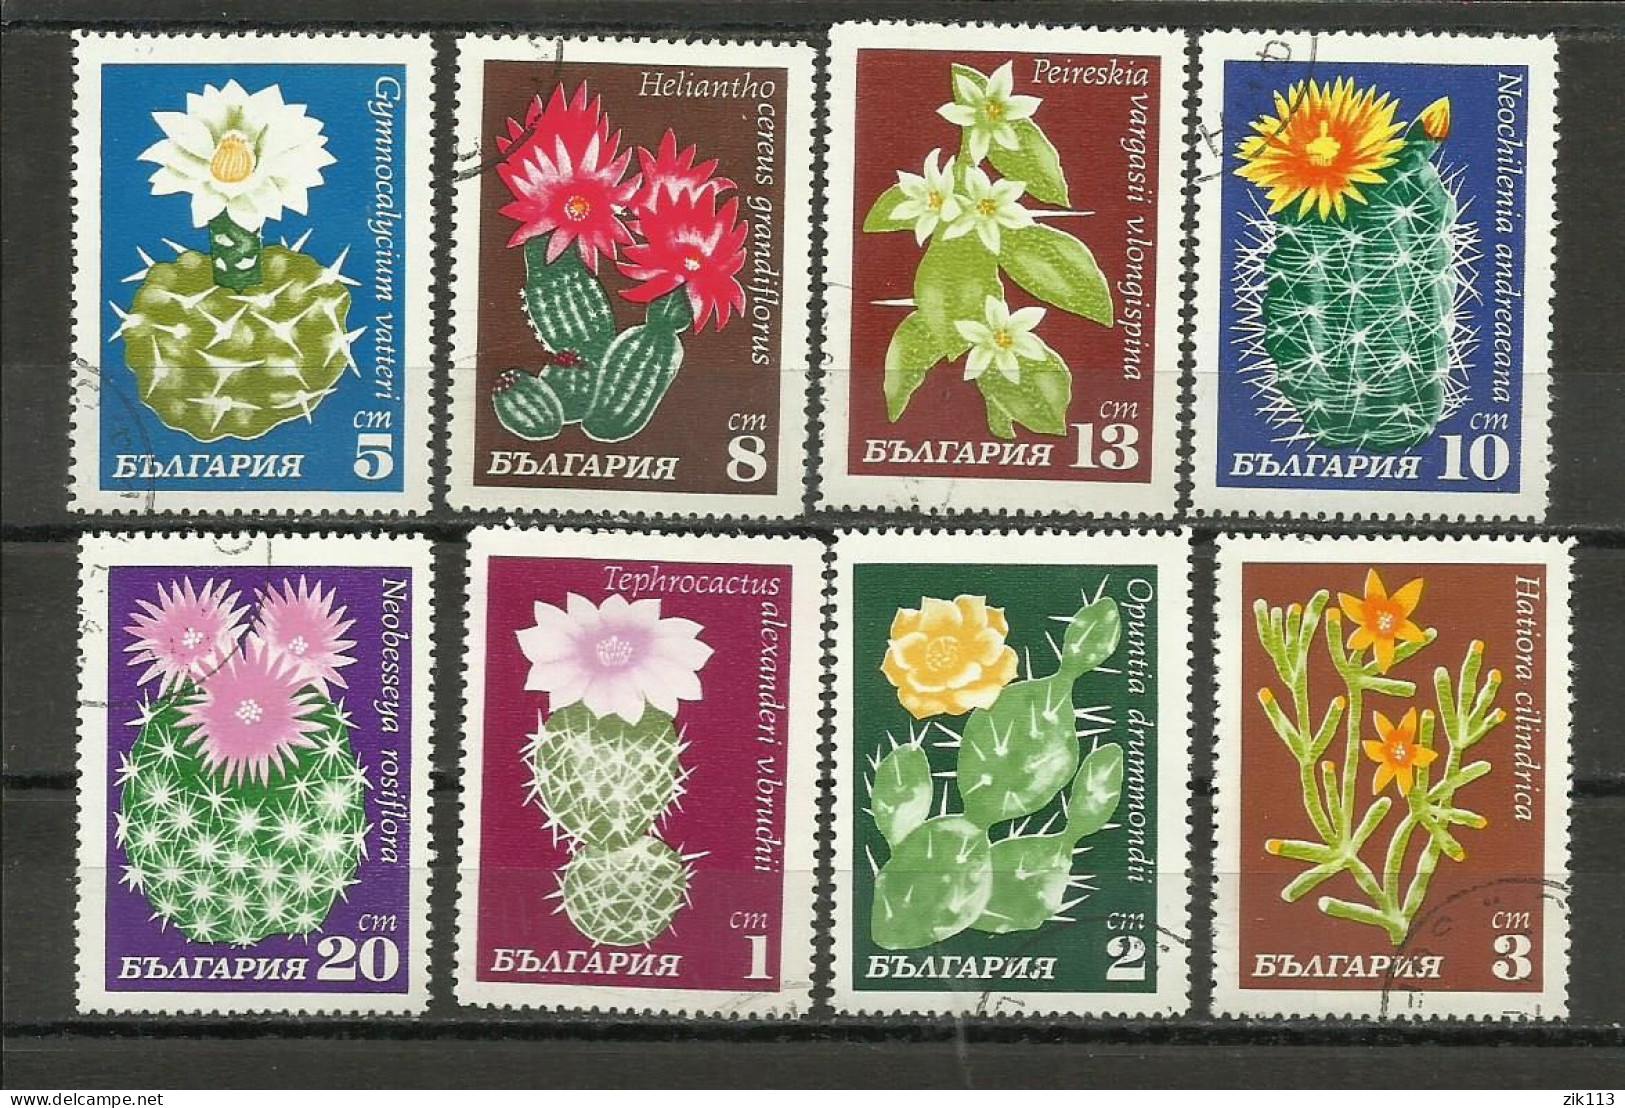 BULGARIA 1970 - CACTUSES, FLOWERS, USED - Used Stamps